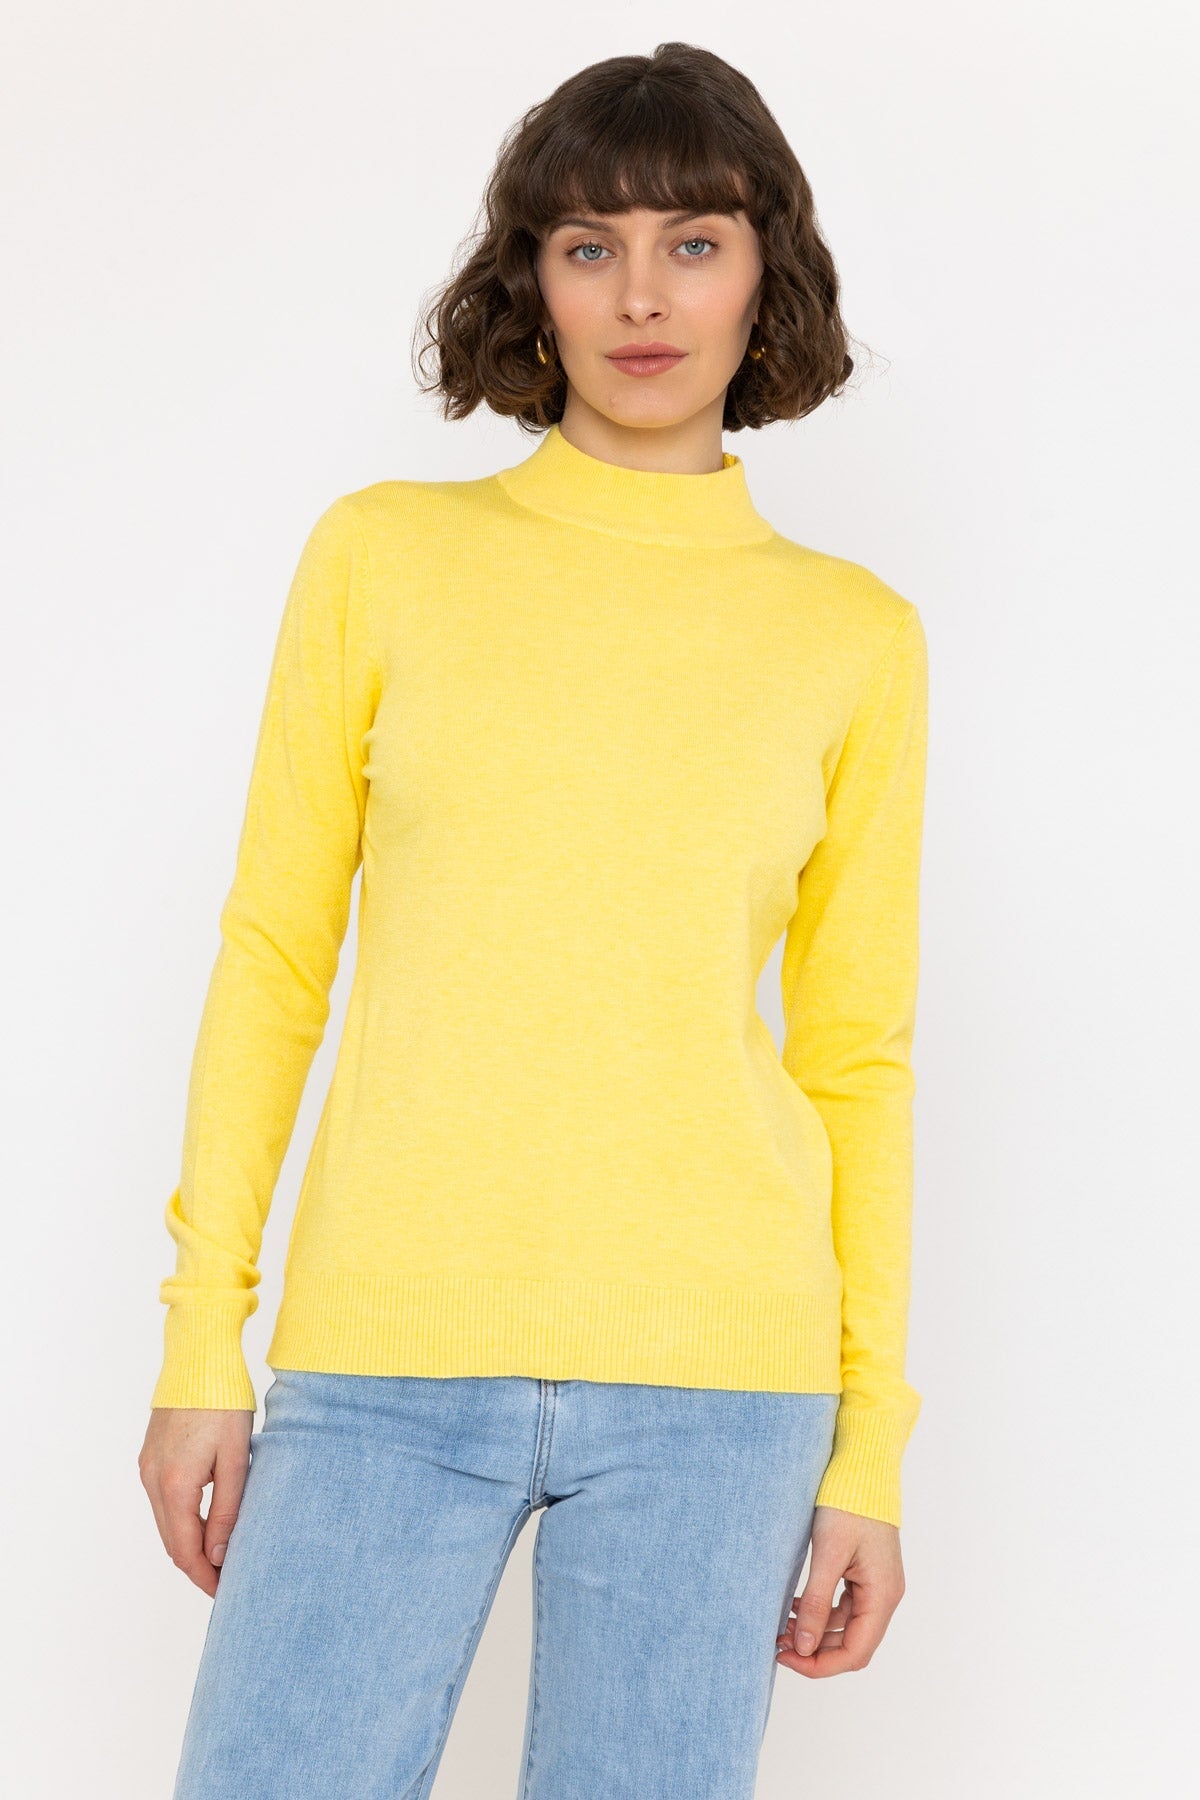 Turtleneck Knit in Yellow